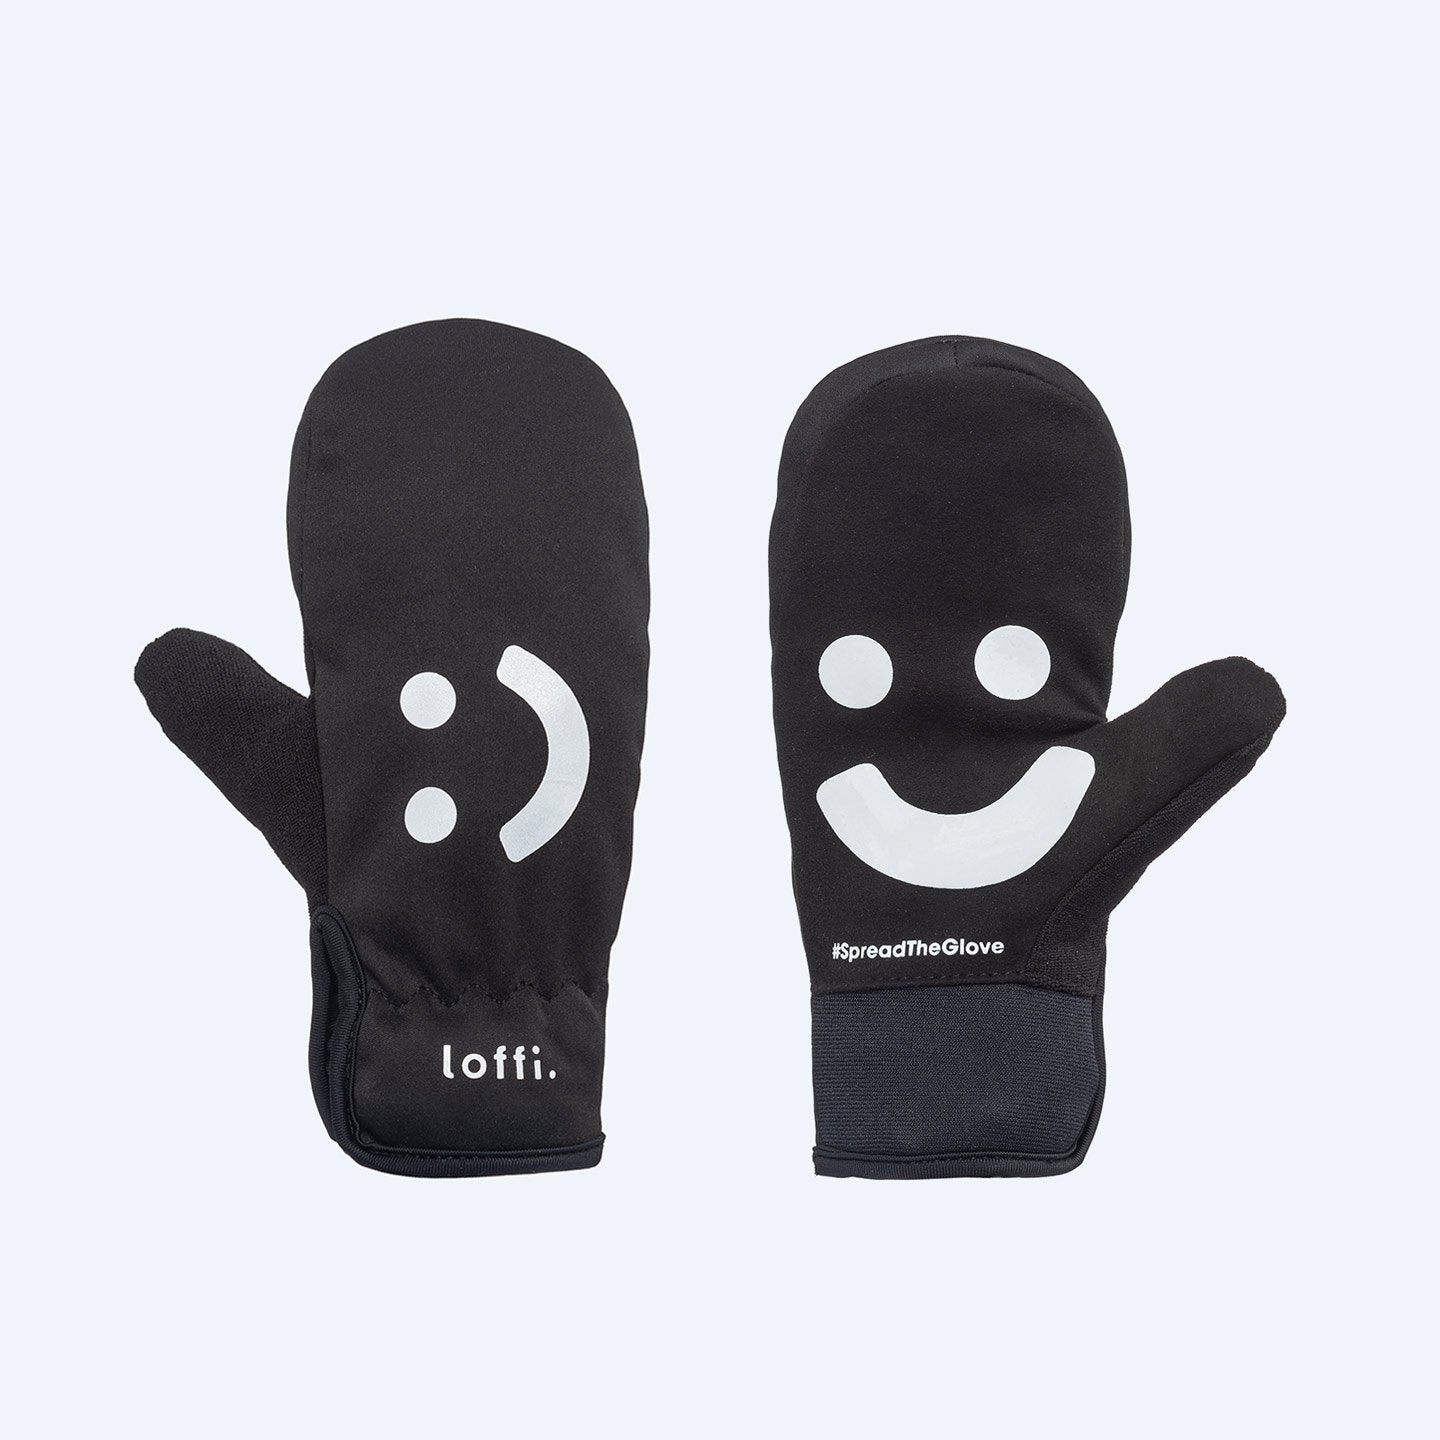 Kids cycling gloves and mittens